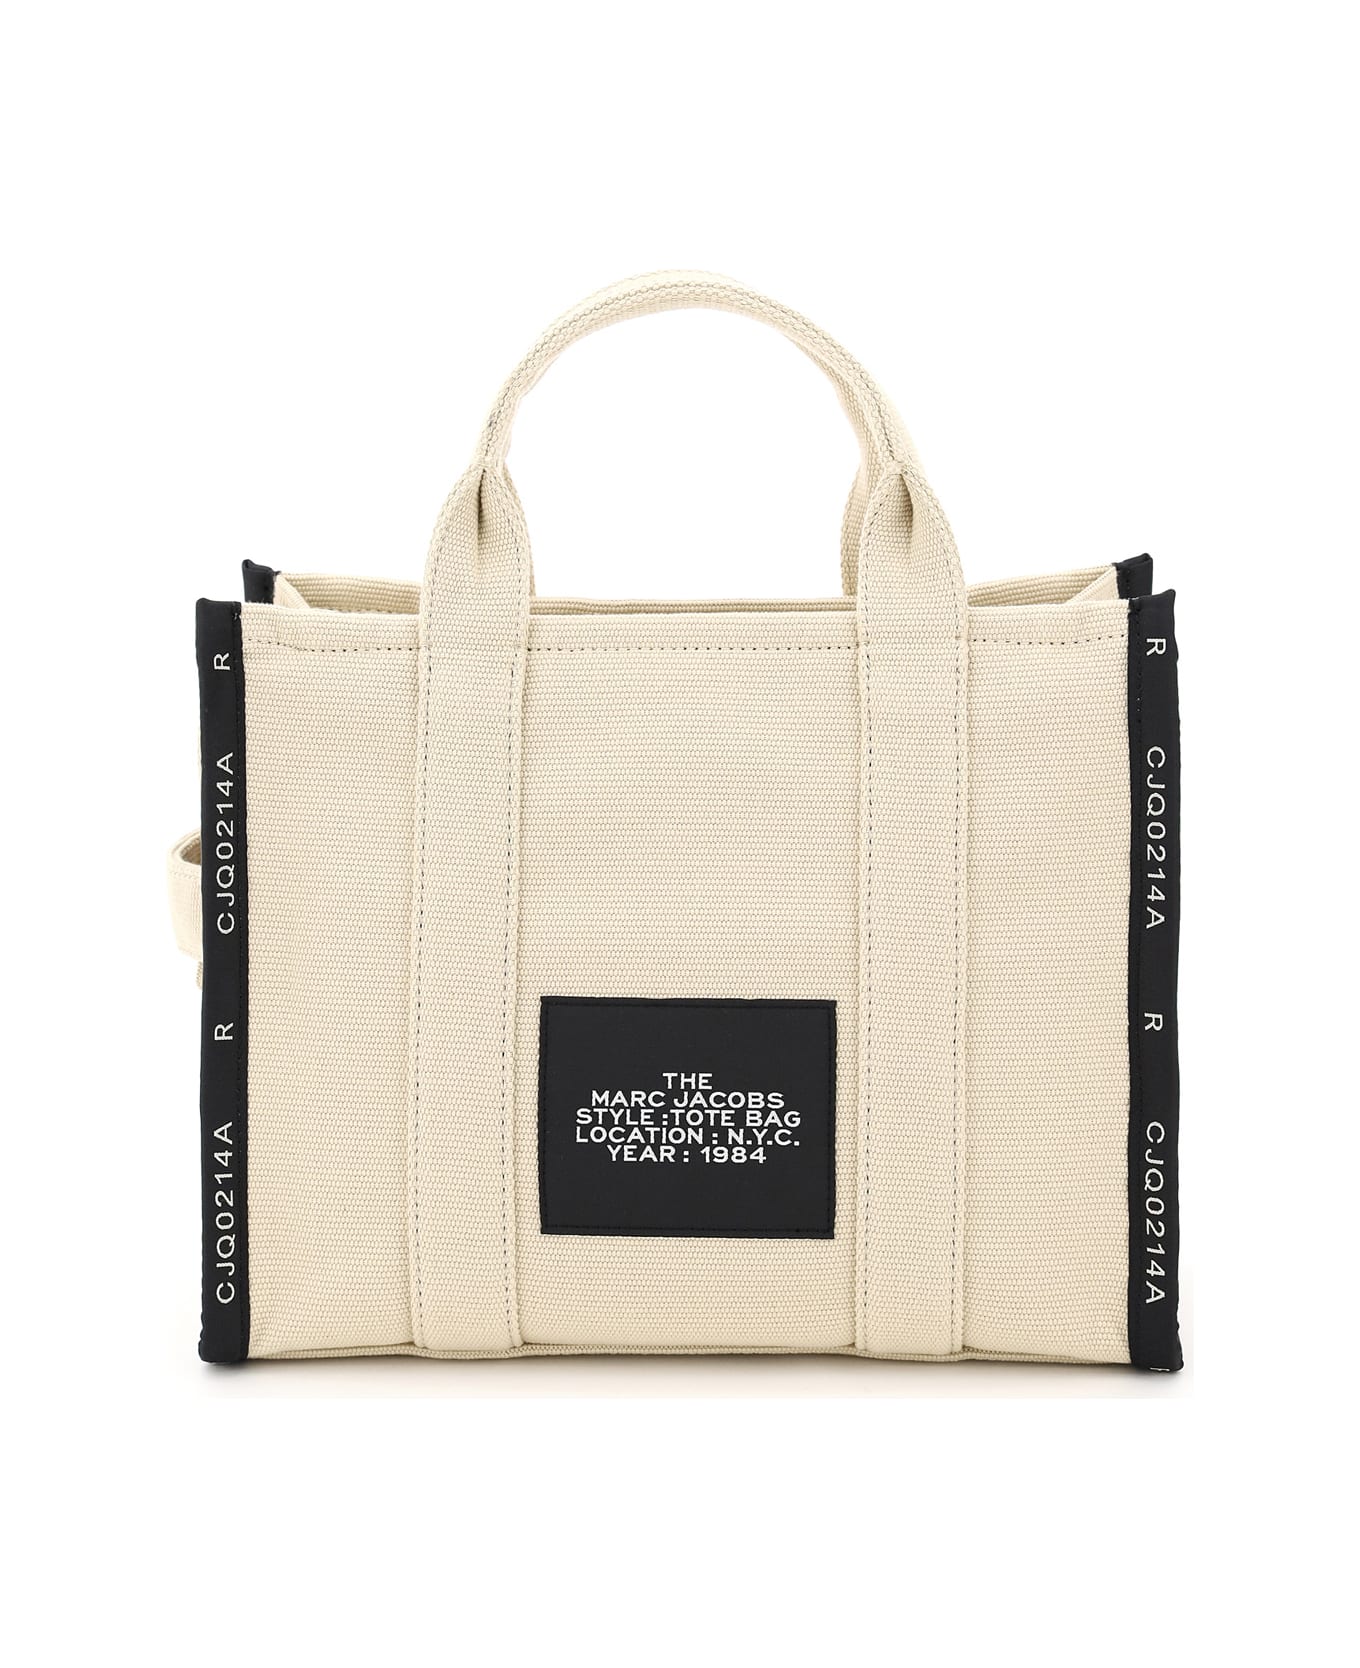 Marc Jacobs The Jacquard Traveler Tote Bag Small - Warm Sand